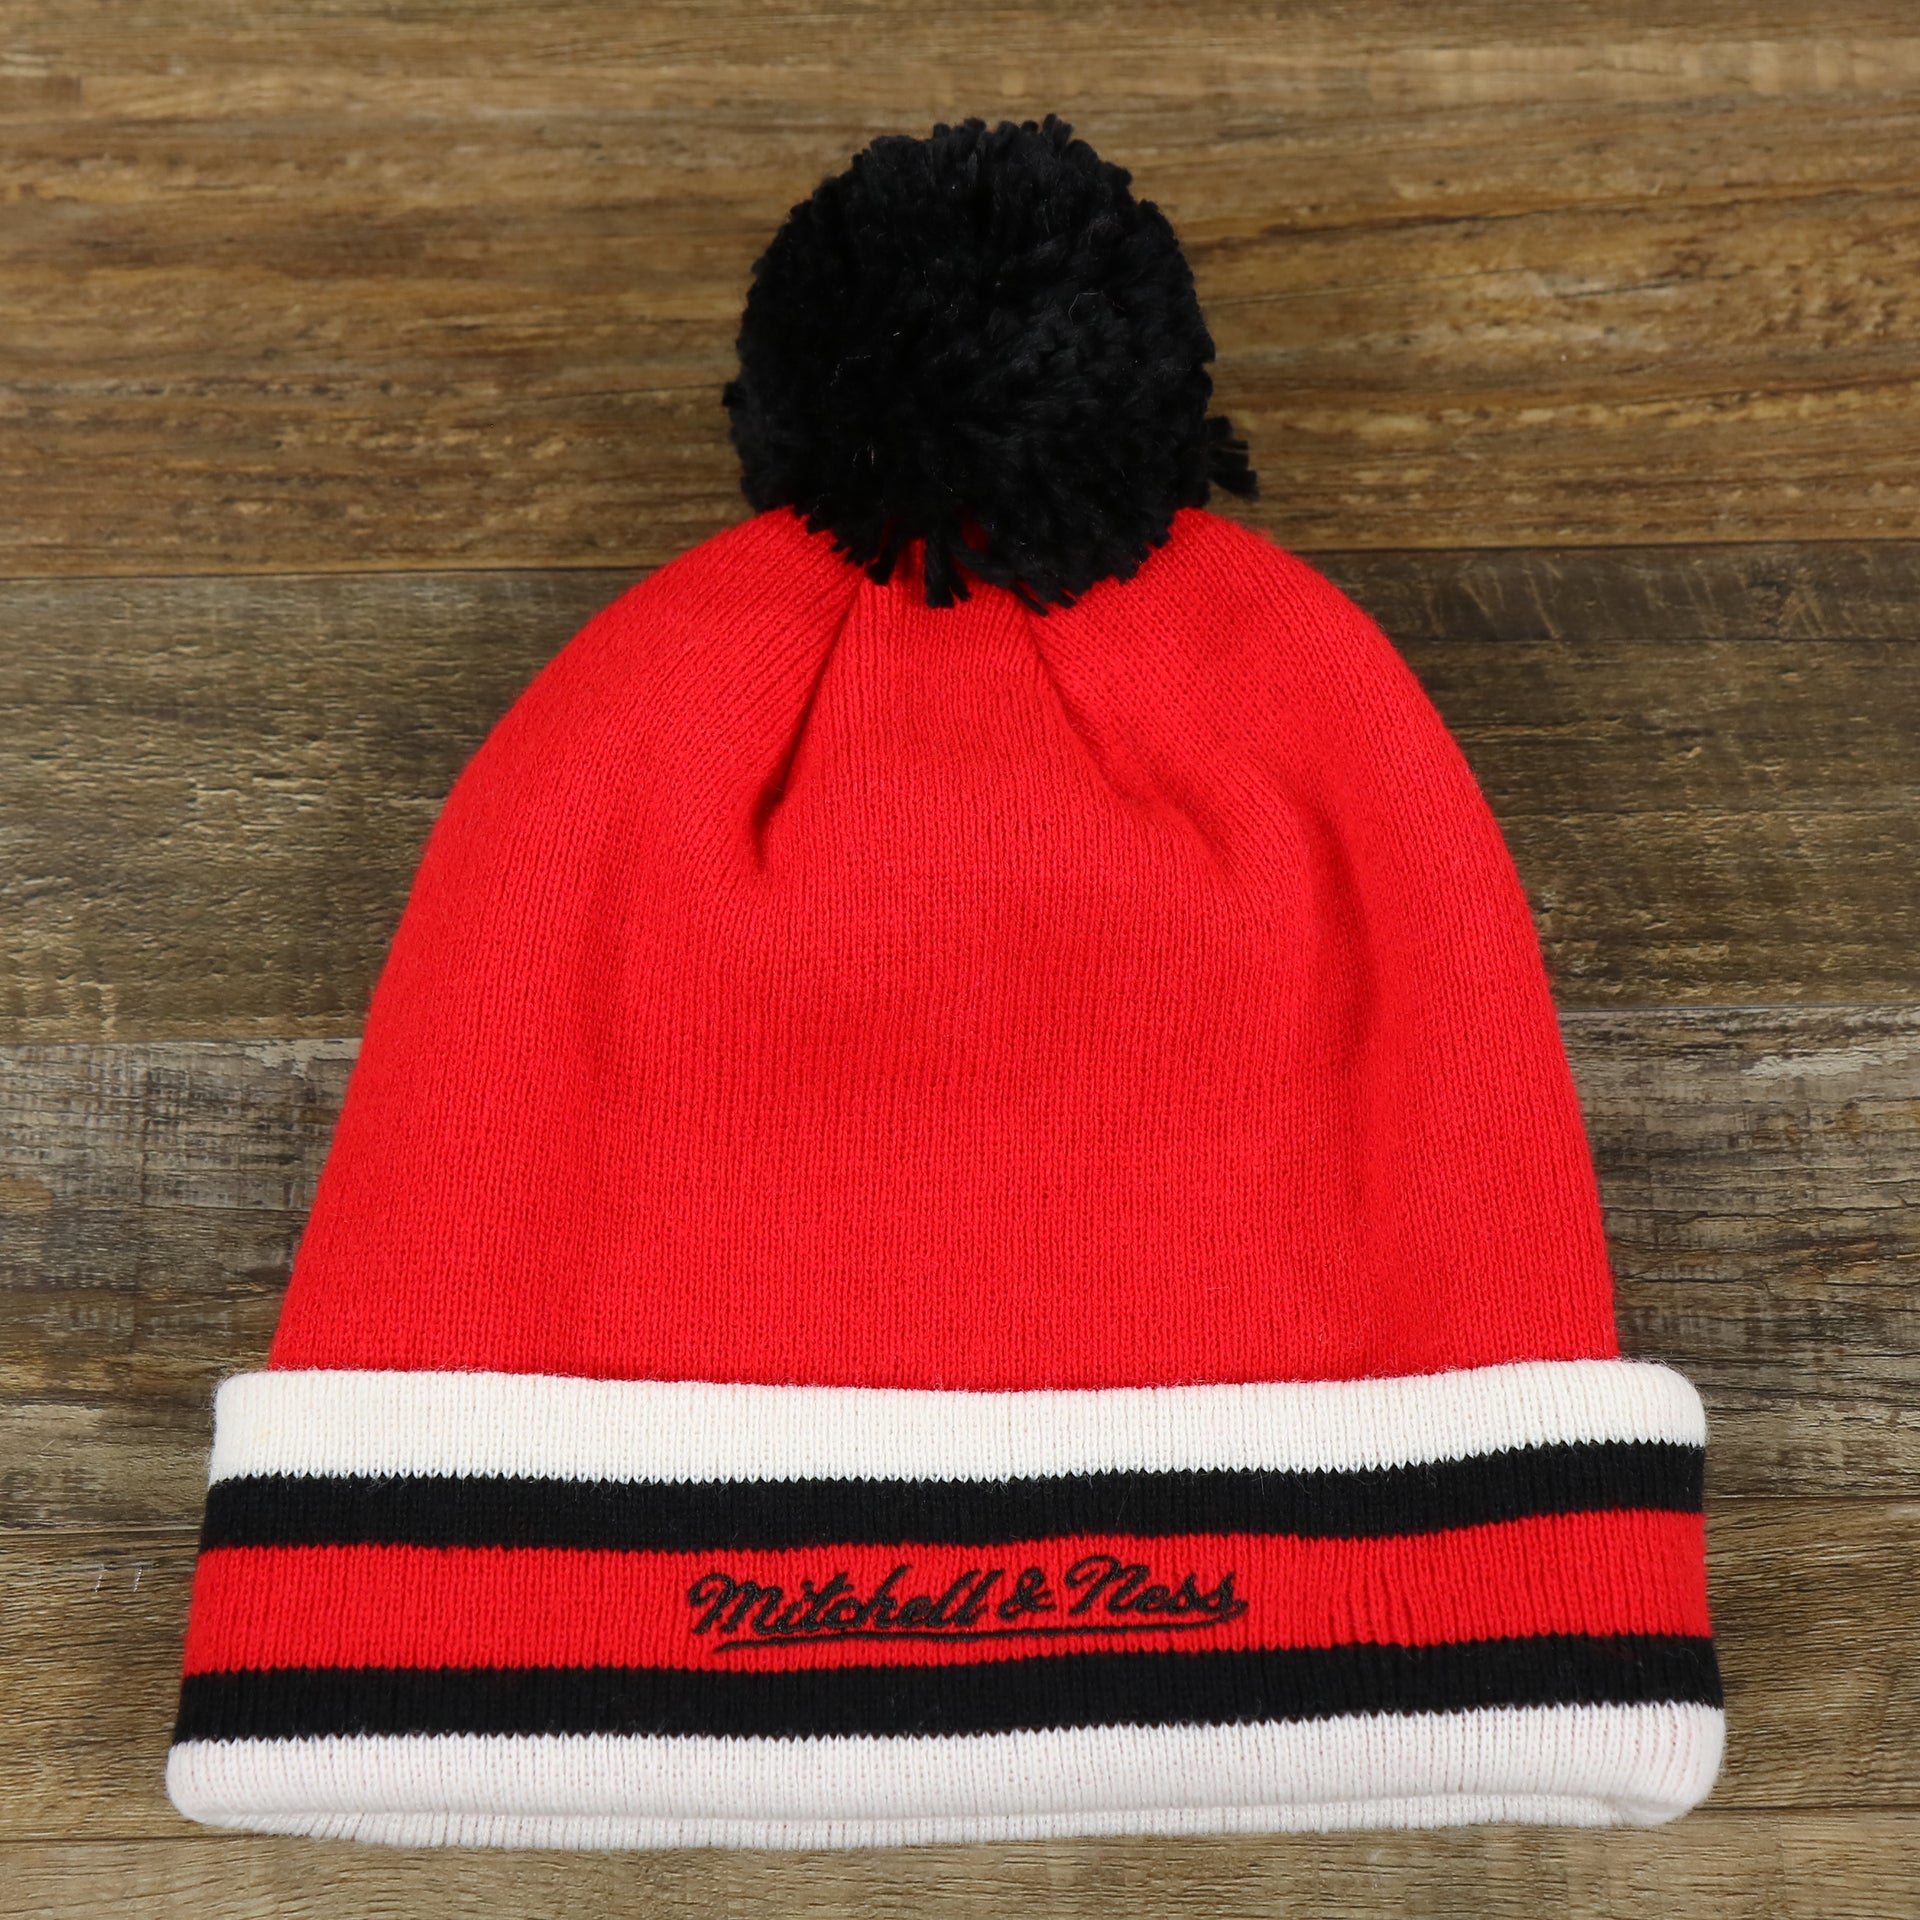 The backside of the Chicago Bulls Striped Cuff Pom Pom Winter Beanie | Red Winter Beanie